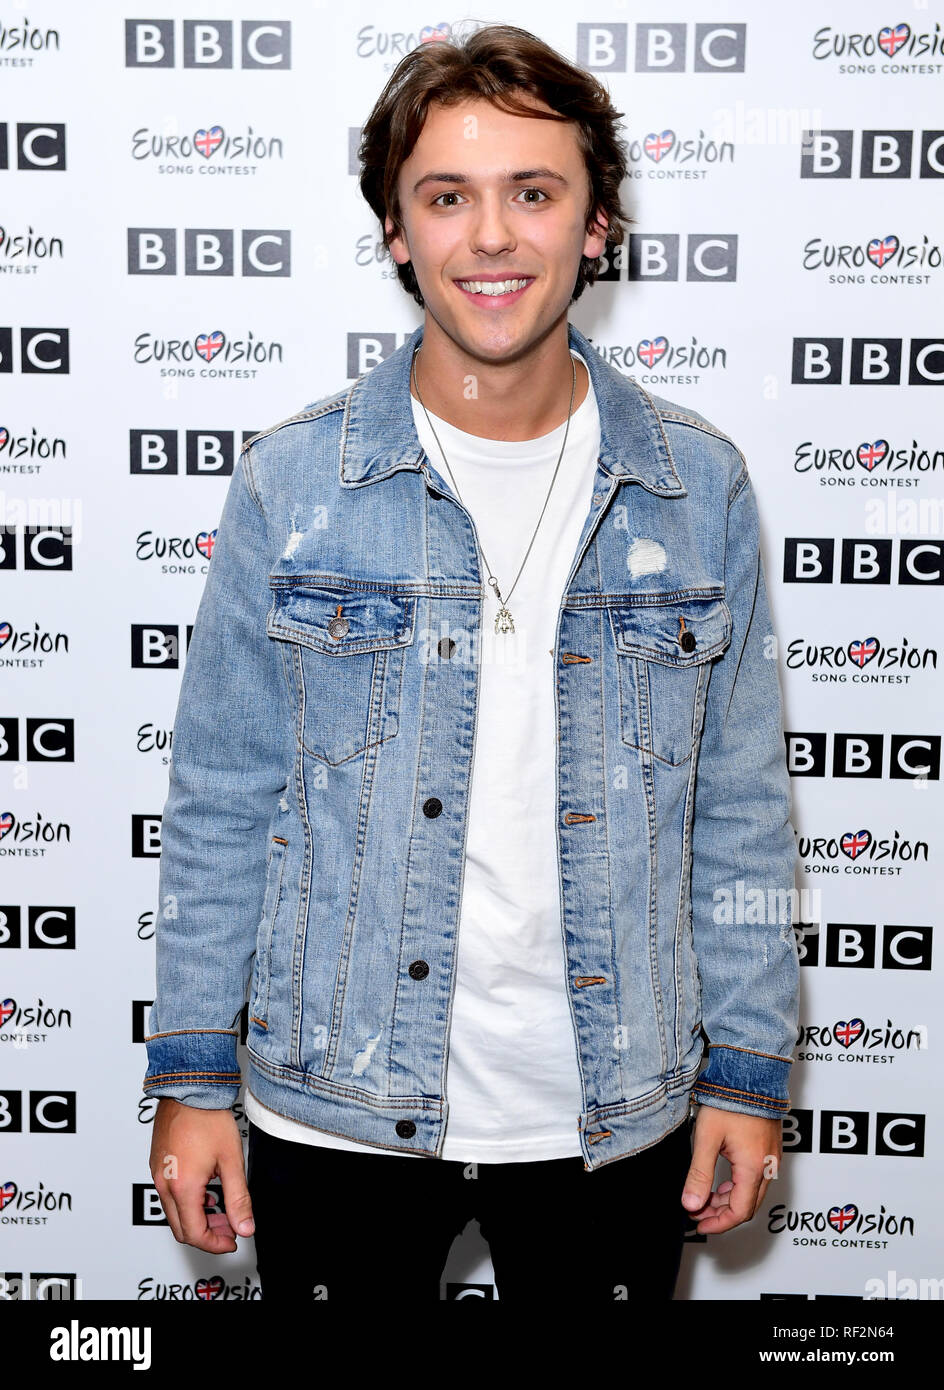 Jordan Clarke attending the Eurovision Meet the Artists event held at the  BBC New Broadcasting House,